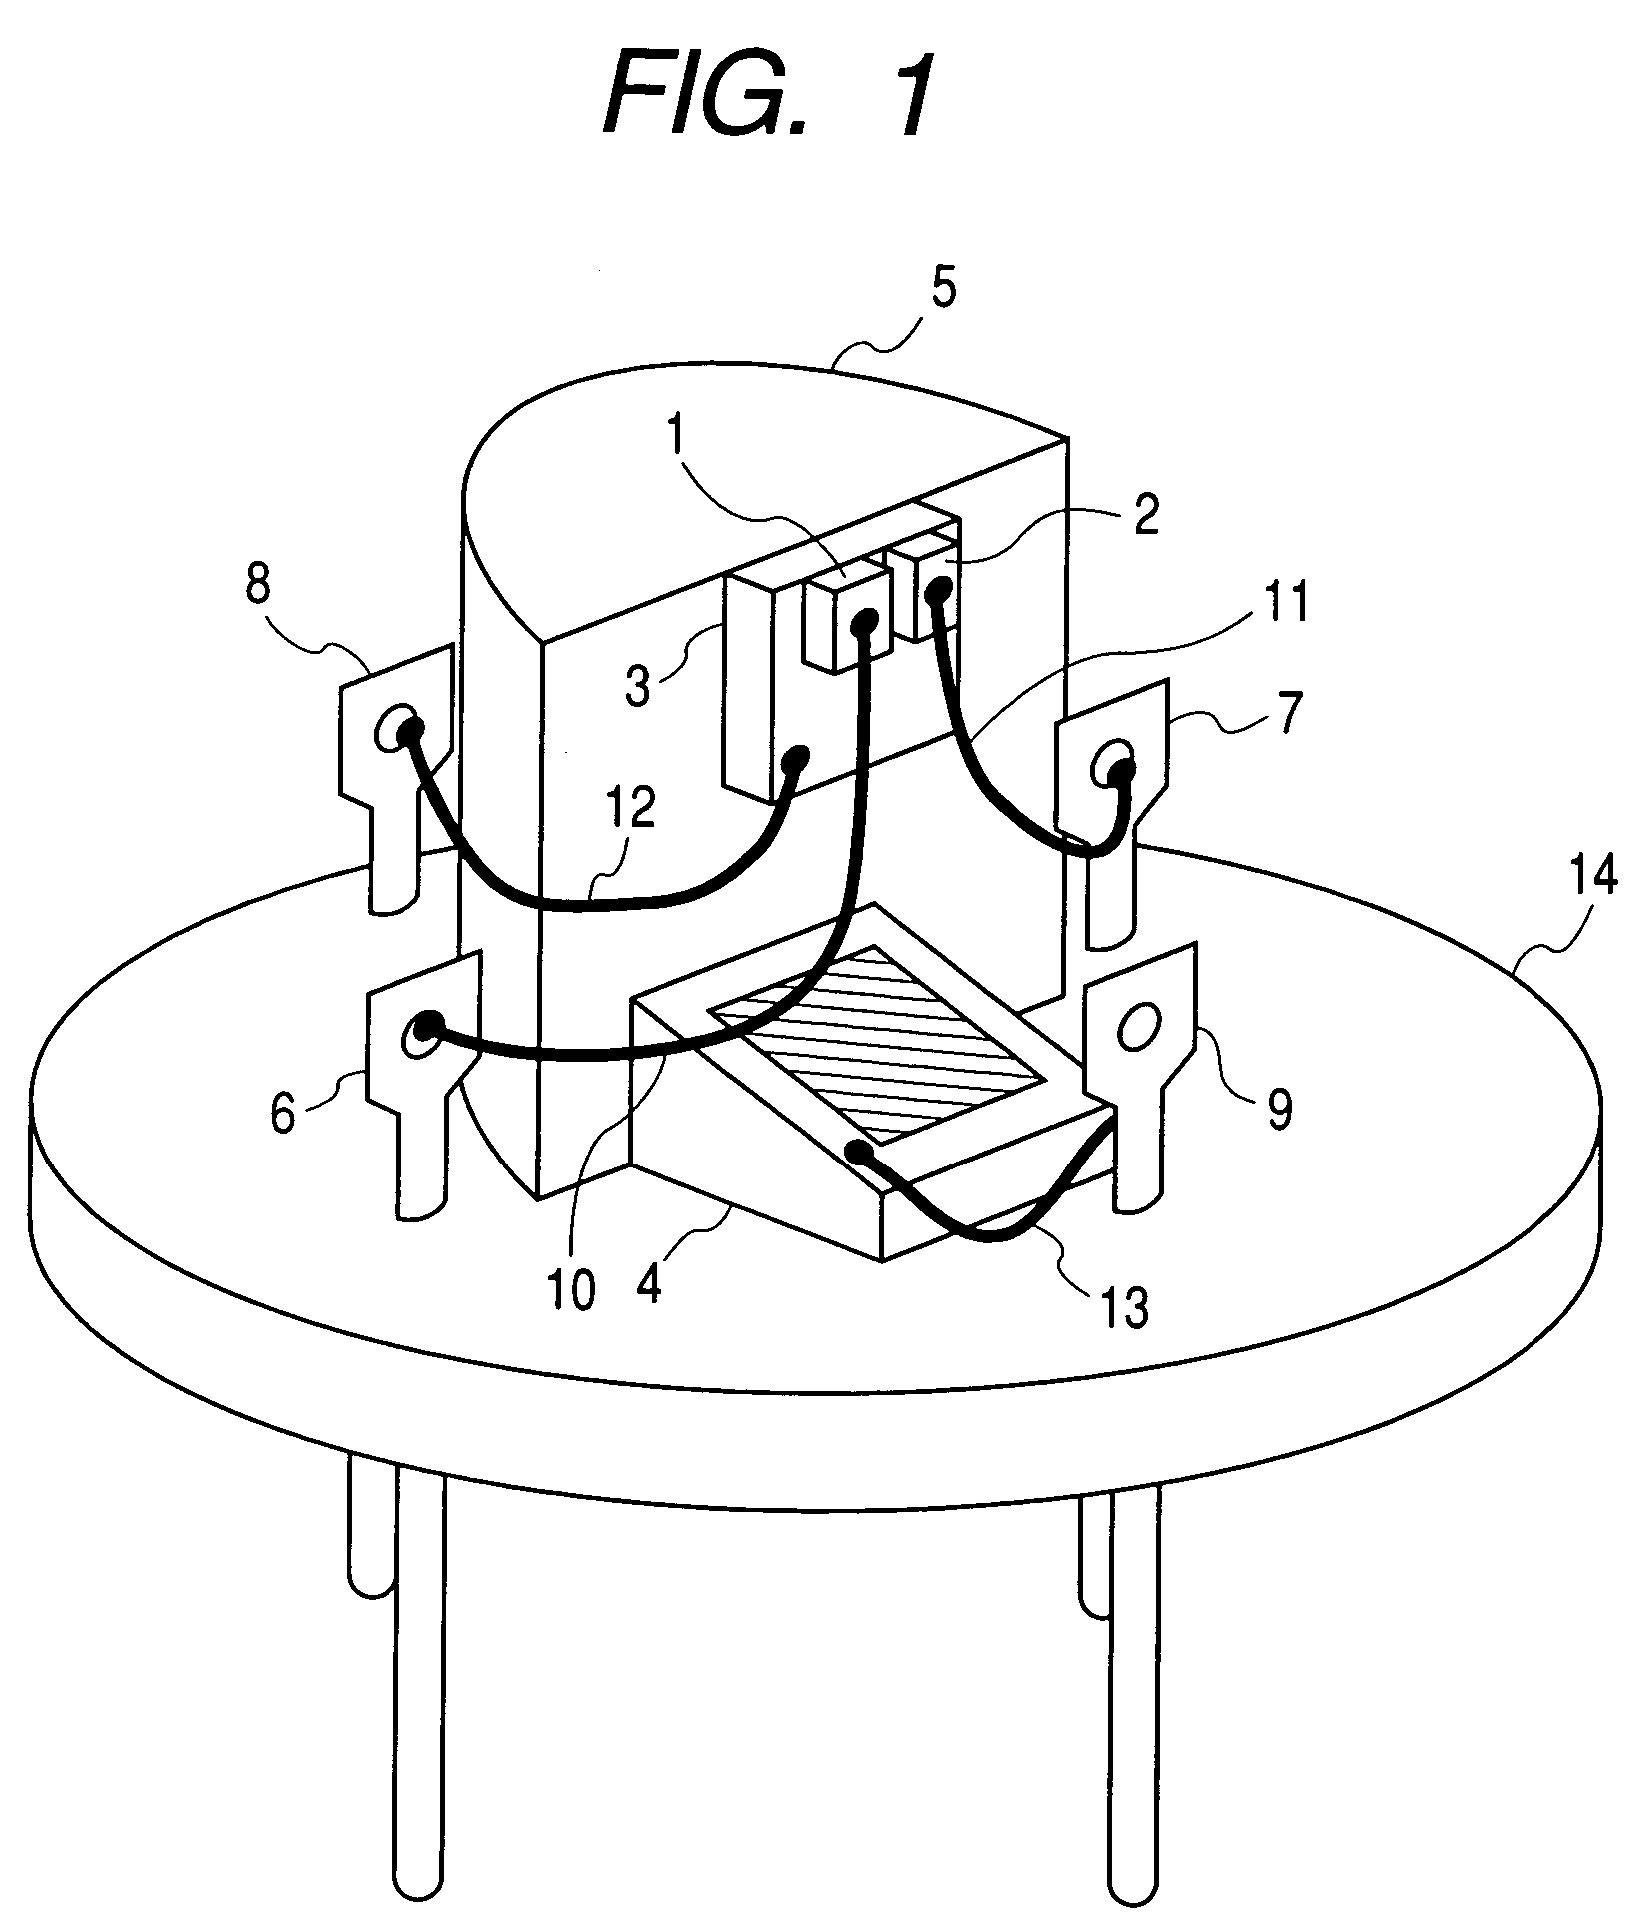 Multilaser device for receiving a plurality of back beams by a common sensor